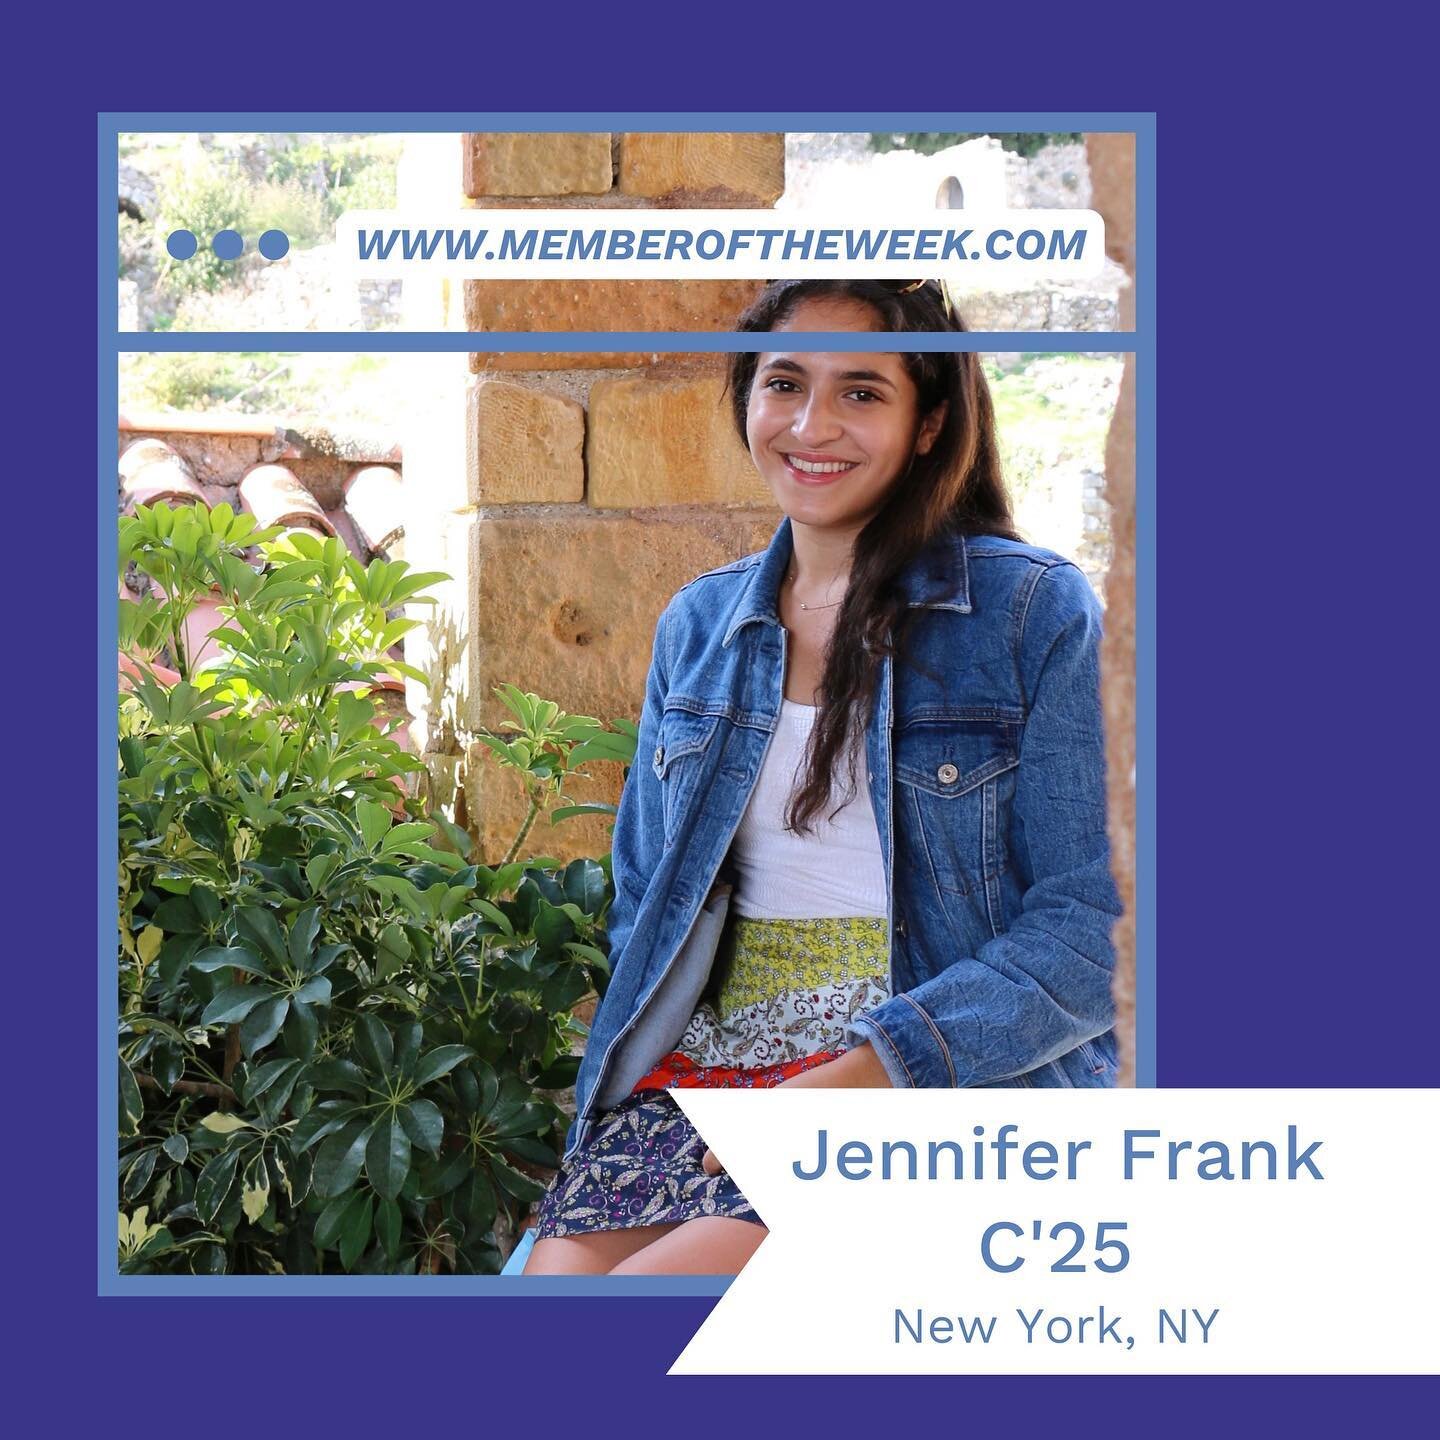 LAST BUT NOT LEAST GIVE IT UP FOR THIS WEEKS MEMBER OF THE WEEK, JENNIFER!!! 🥳🥳 Swipe to learn more about one of our awesome members!